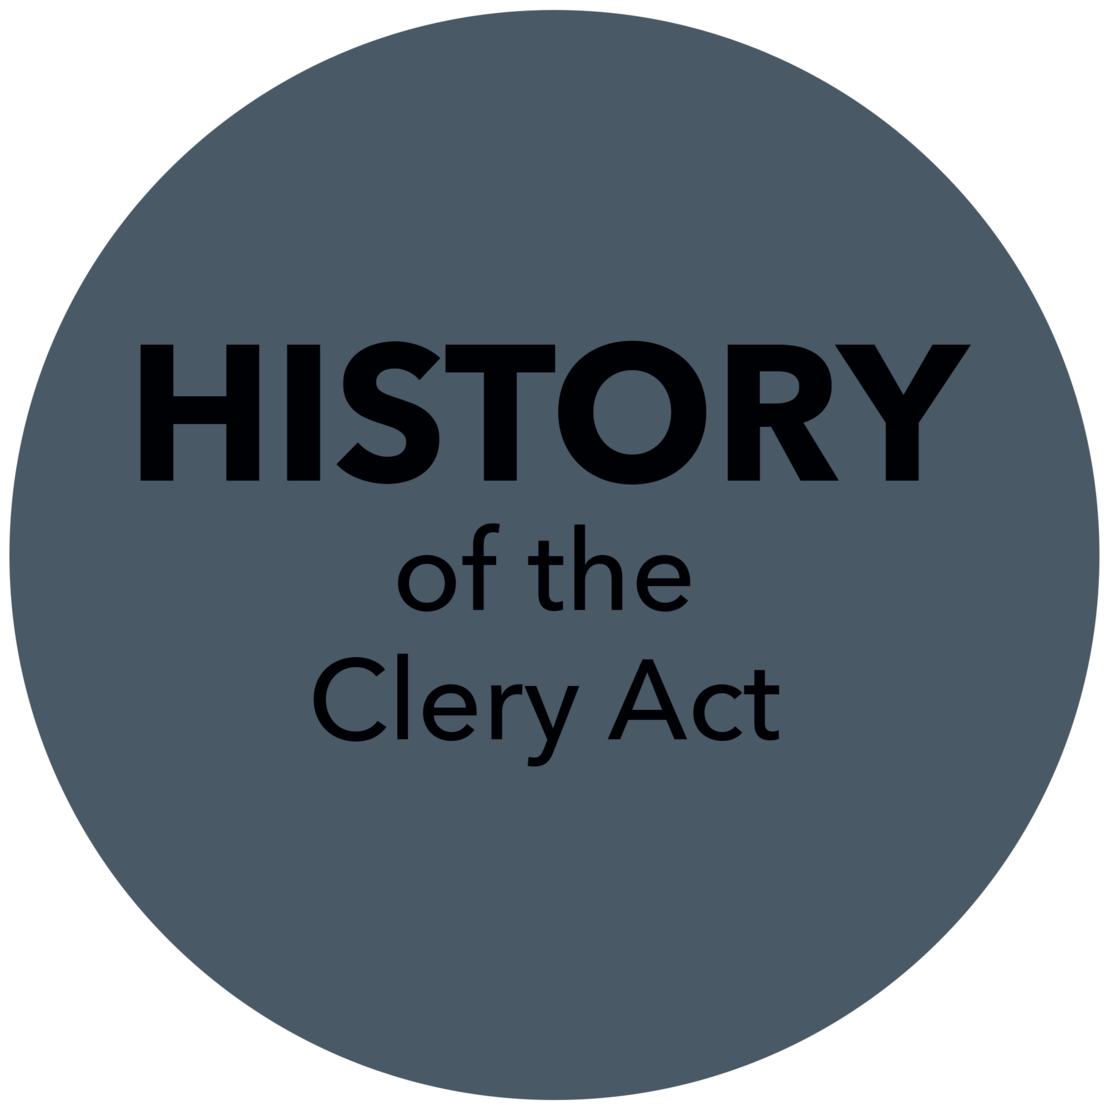 History of the Clery Act